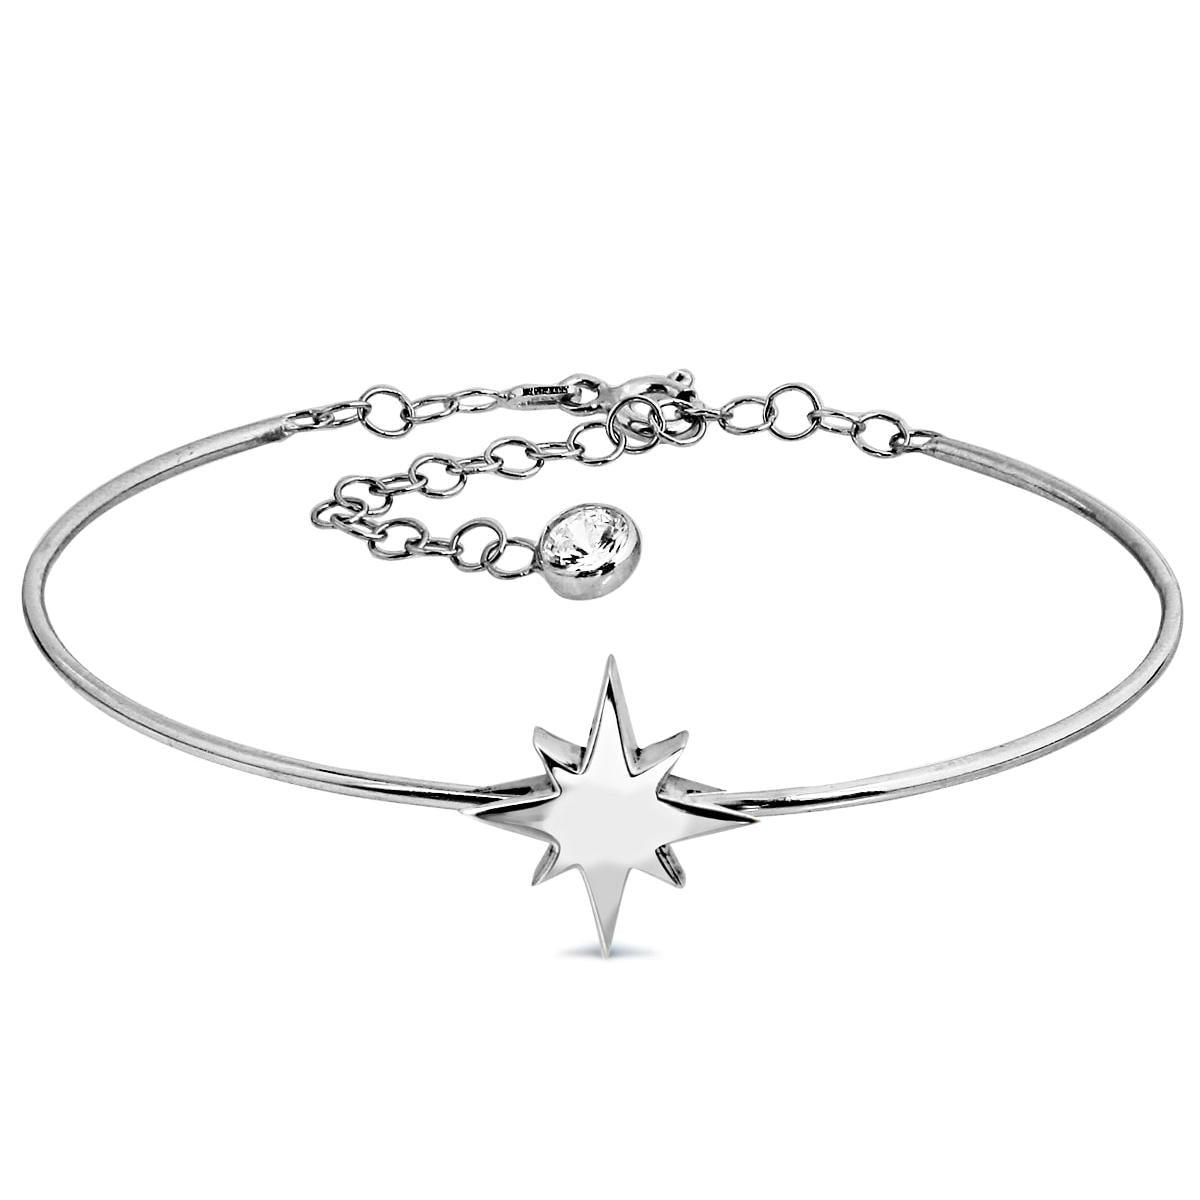 North Star Silver Bangle Braclet • Bridesmaid Gift For Wedding - Trending Silver Gifts